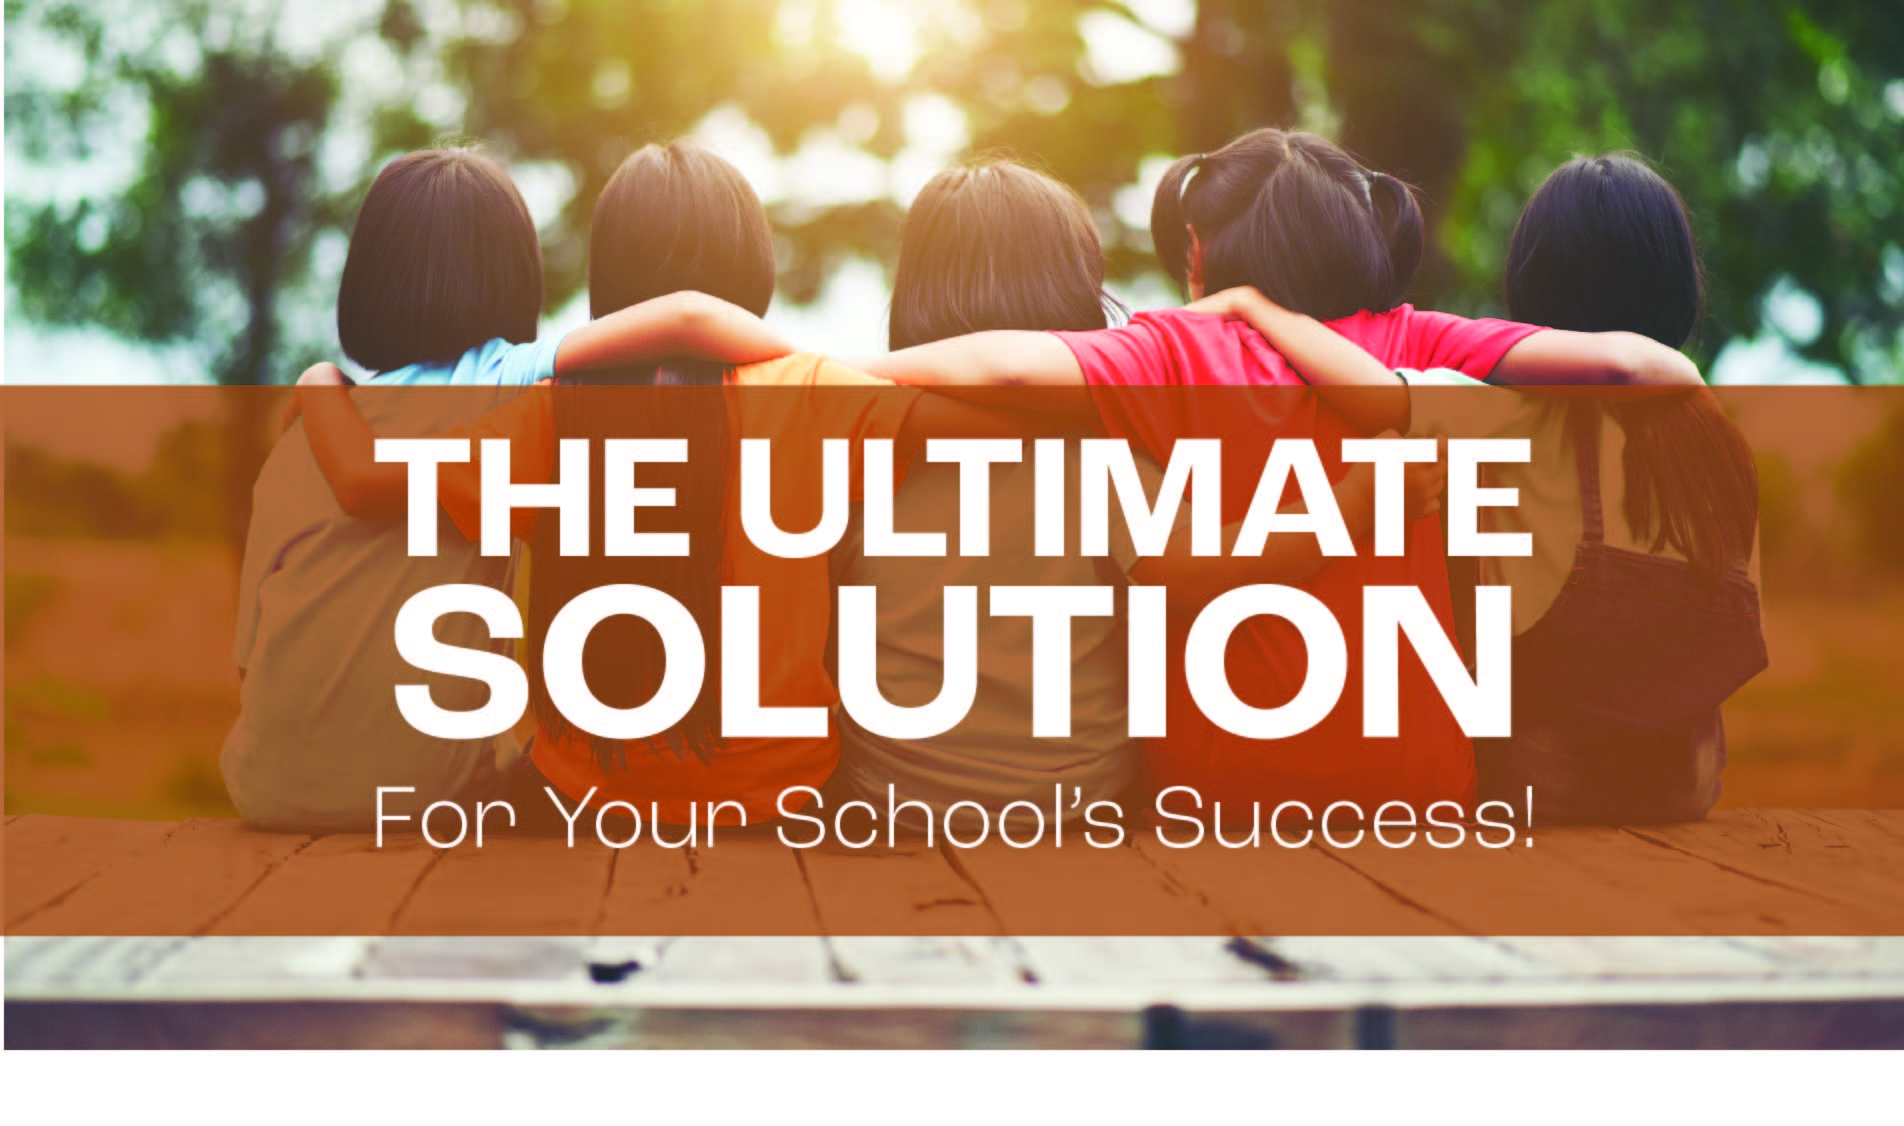 Reviving Product Fundraising The Ultimate Solution for Your School's Success!638230420107573534